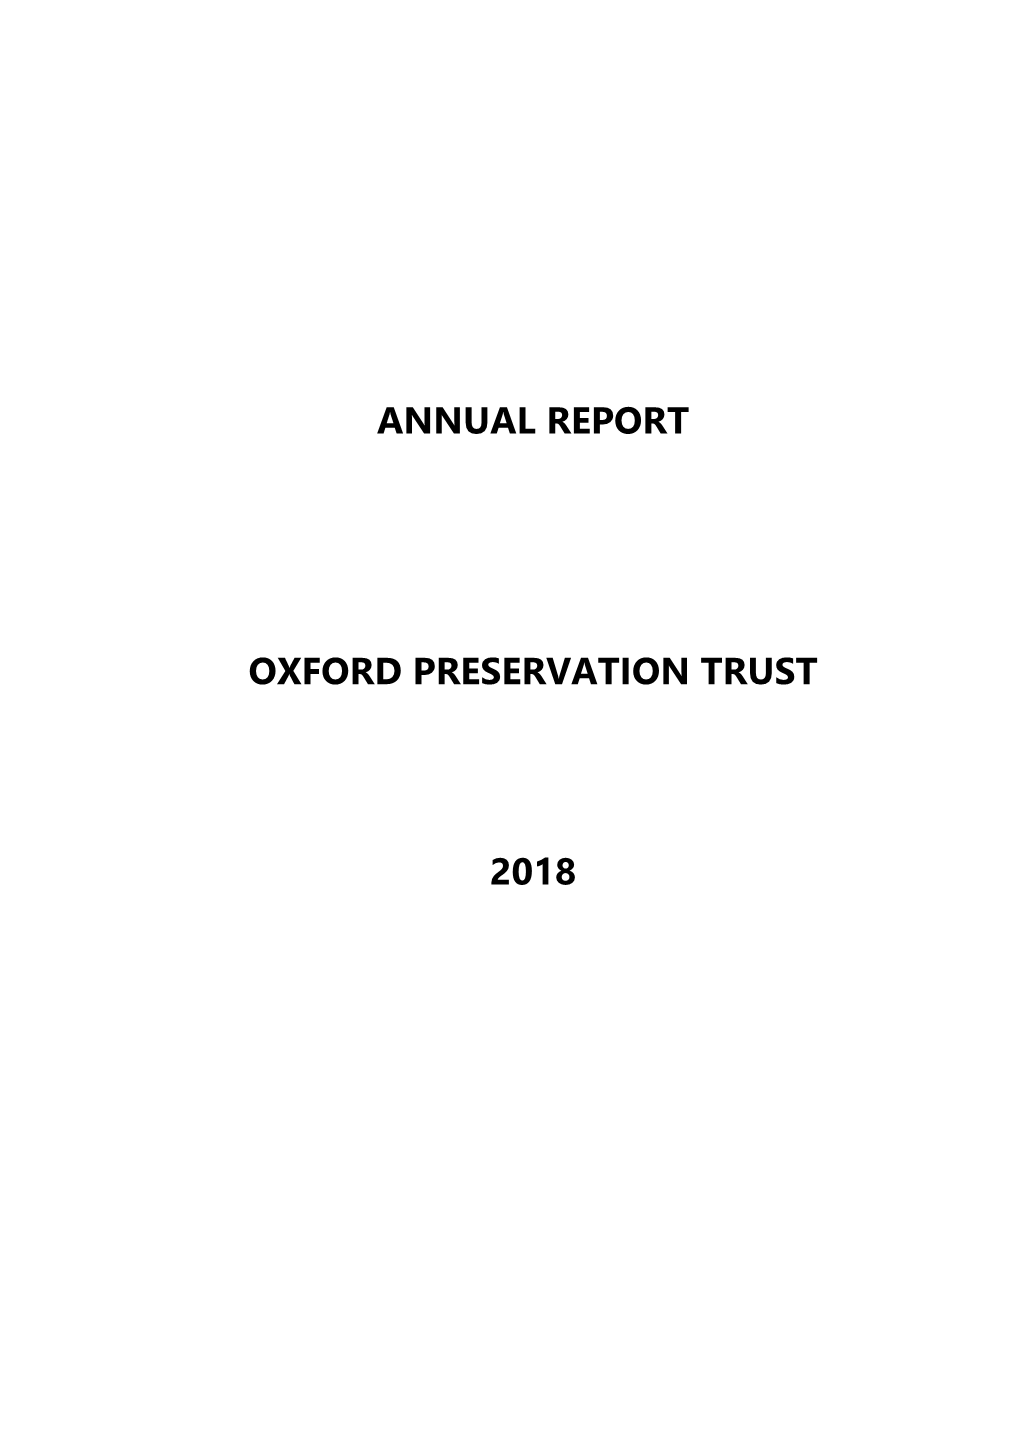 View Our Annual Report 2018